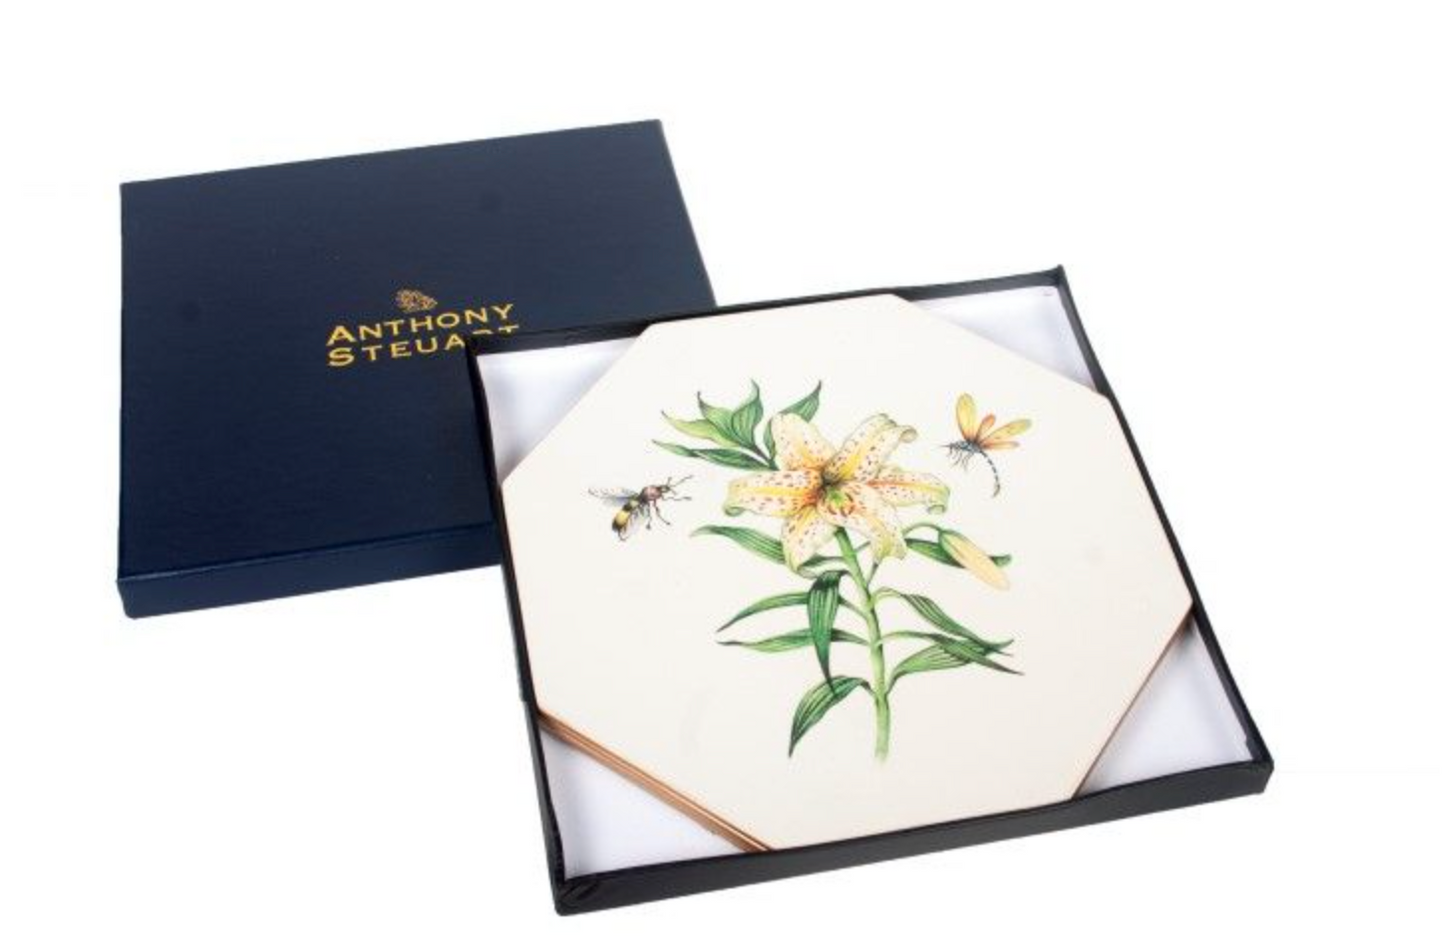 Octagonal Tablemats Set of 4 (boxed): Japanese Lily